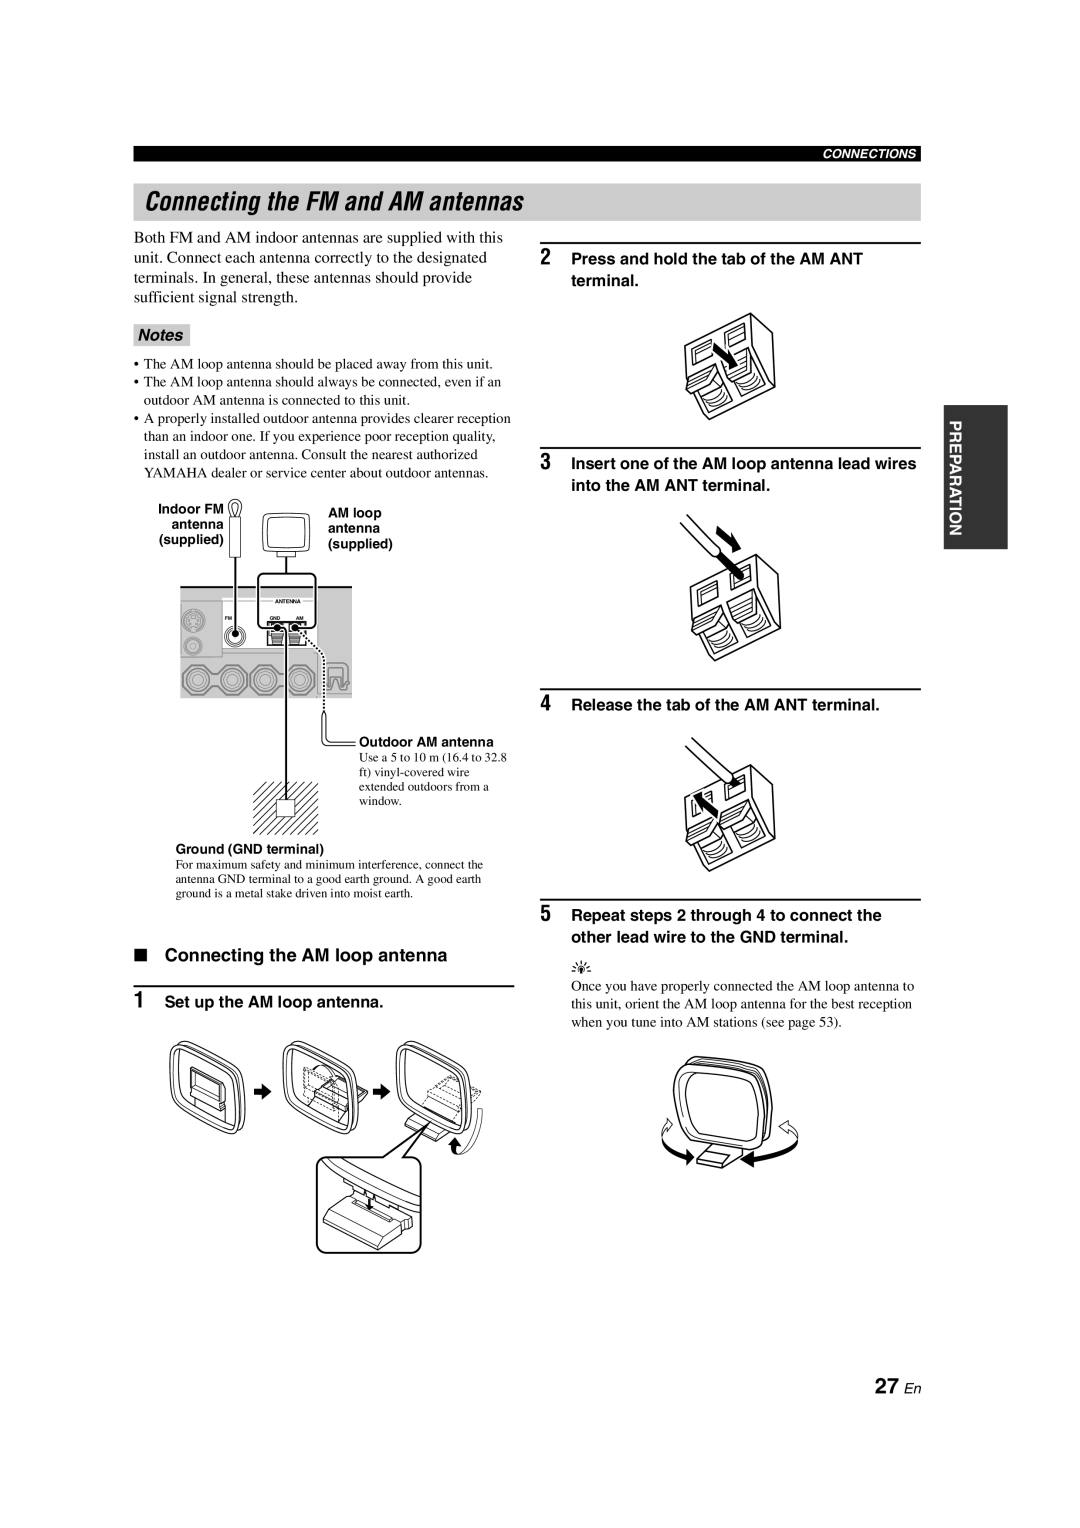 Yamaha HTR-6090 owner manual Connecting the FM and AM antennas, 27 En, Connecting the AM loop antenna 